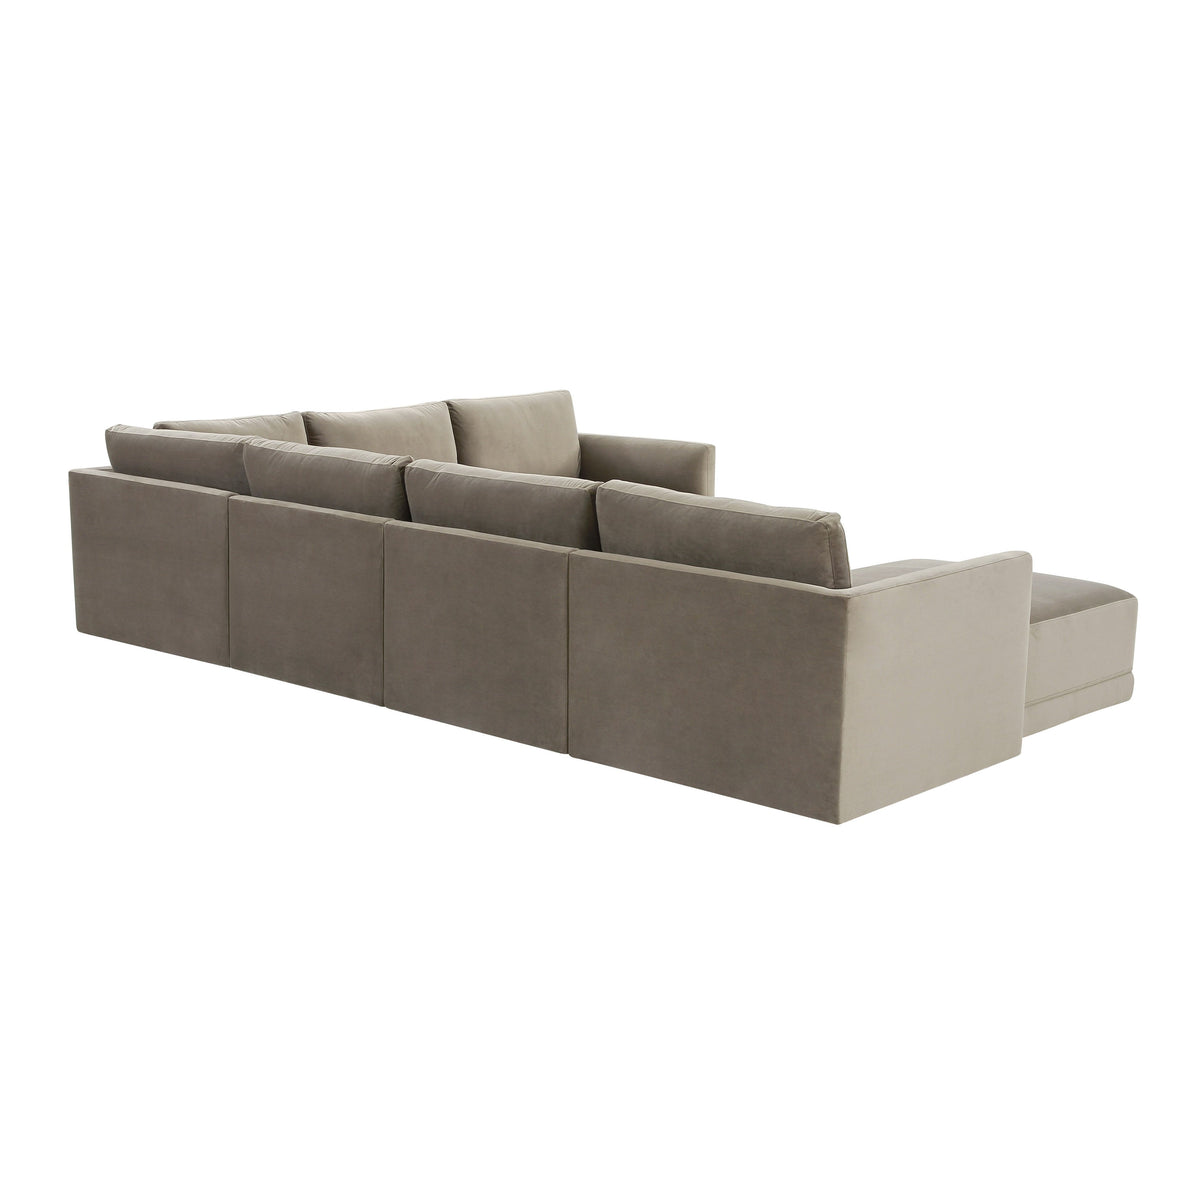 Valentina Taupe Velvet Modular Large Sectional Sofa - Luxury Living Collection